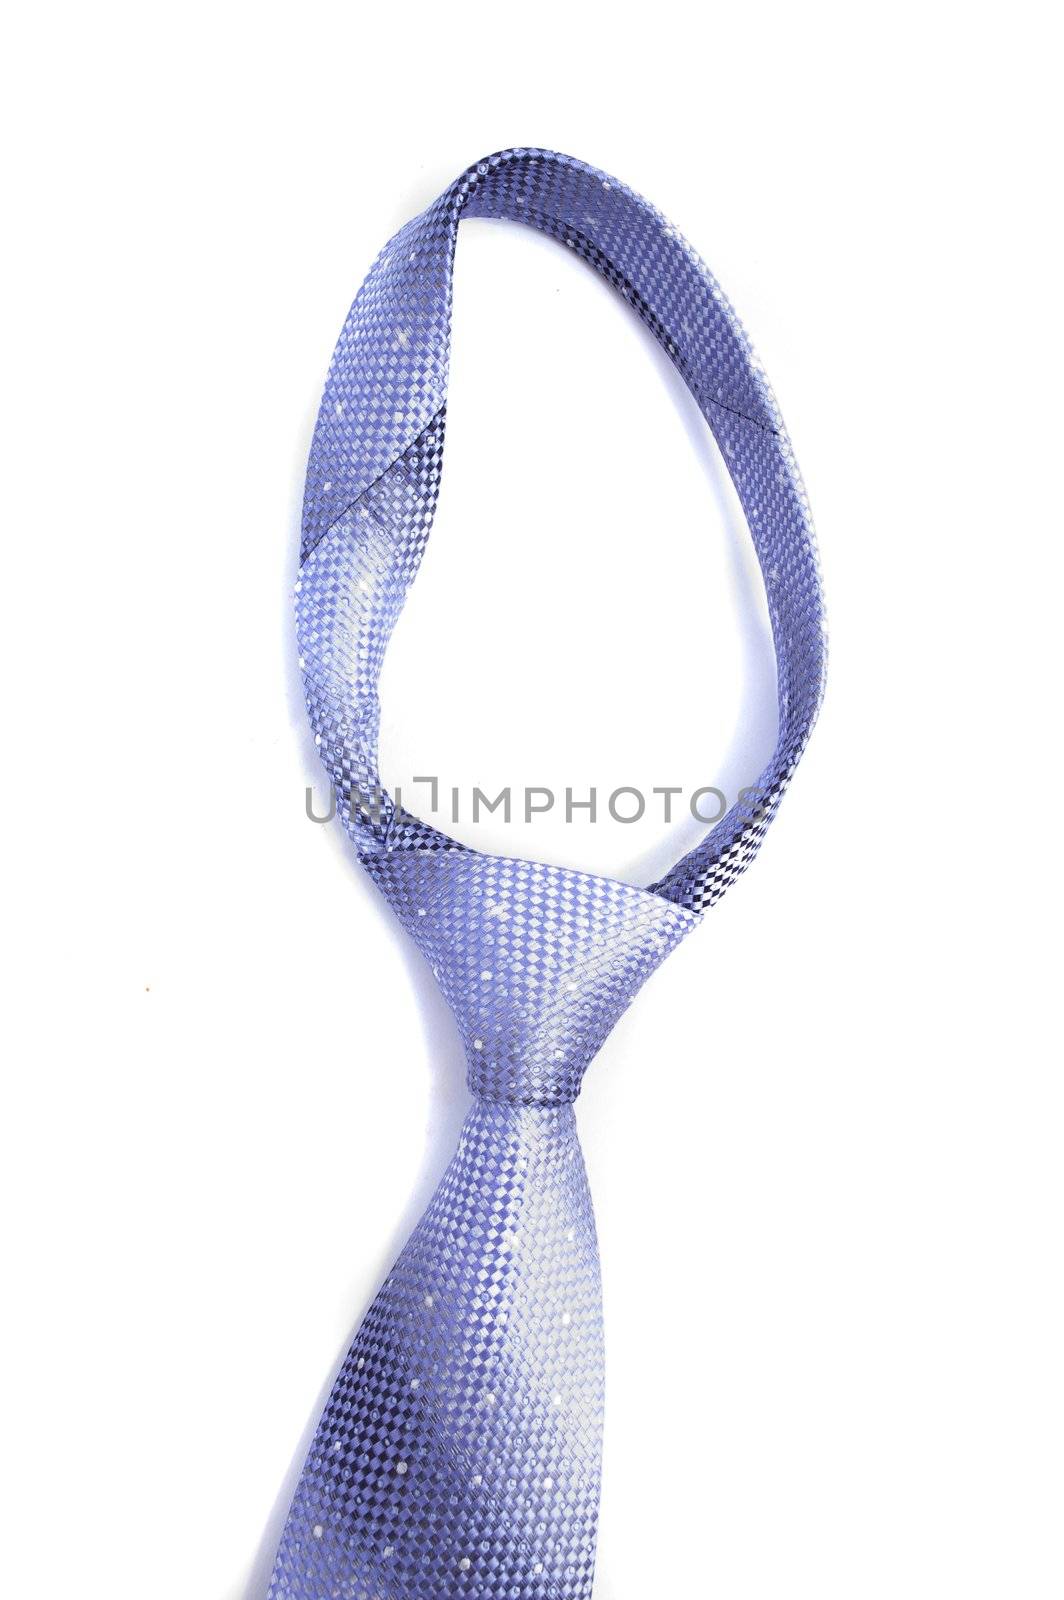 fragment of a tie on a white background